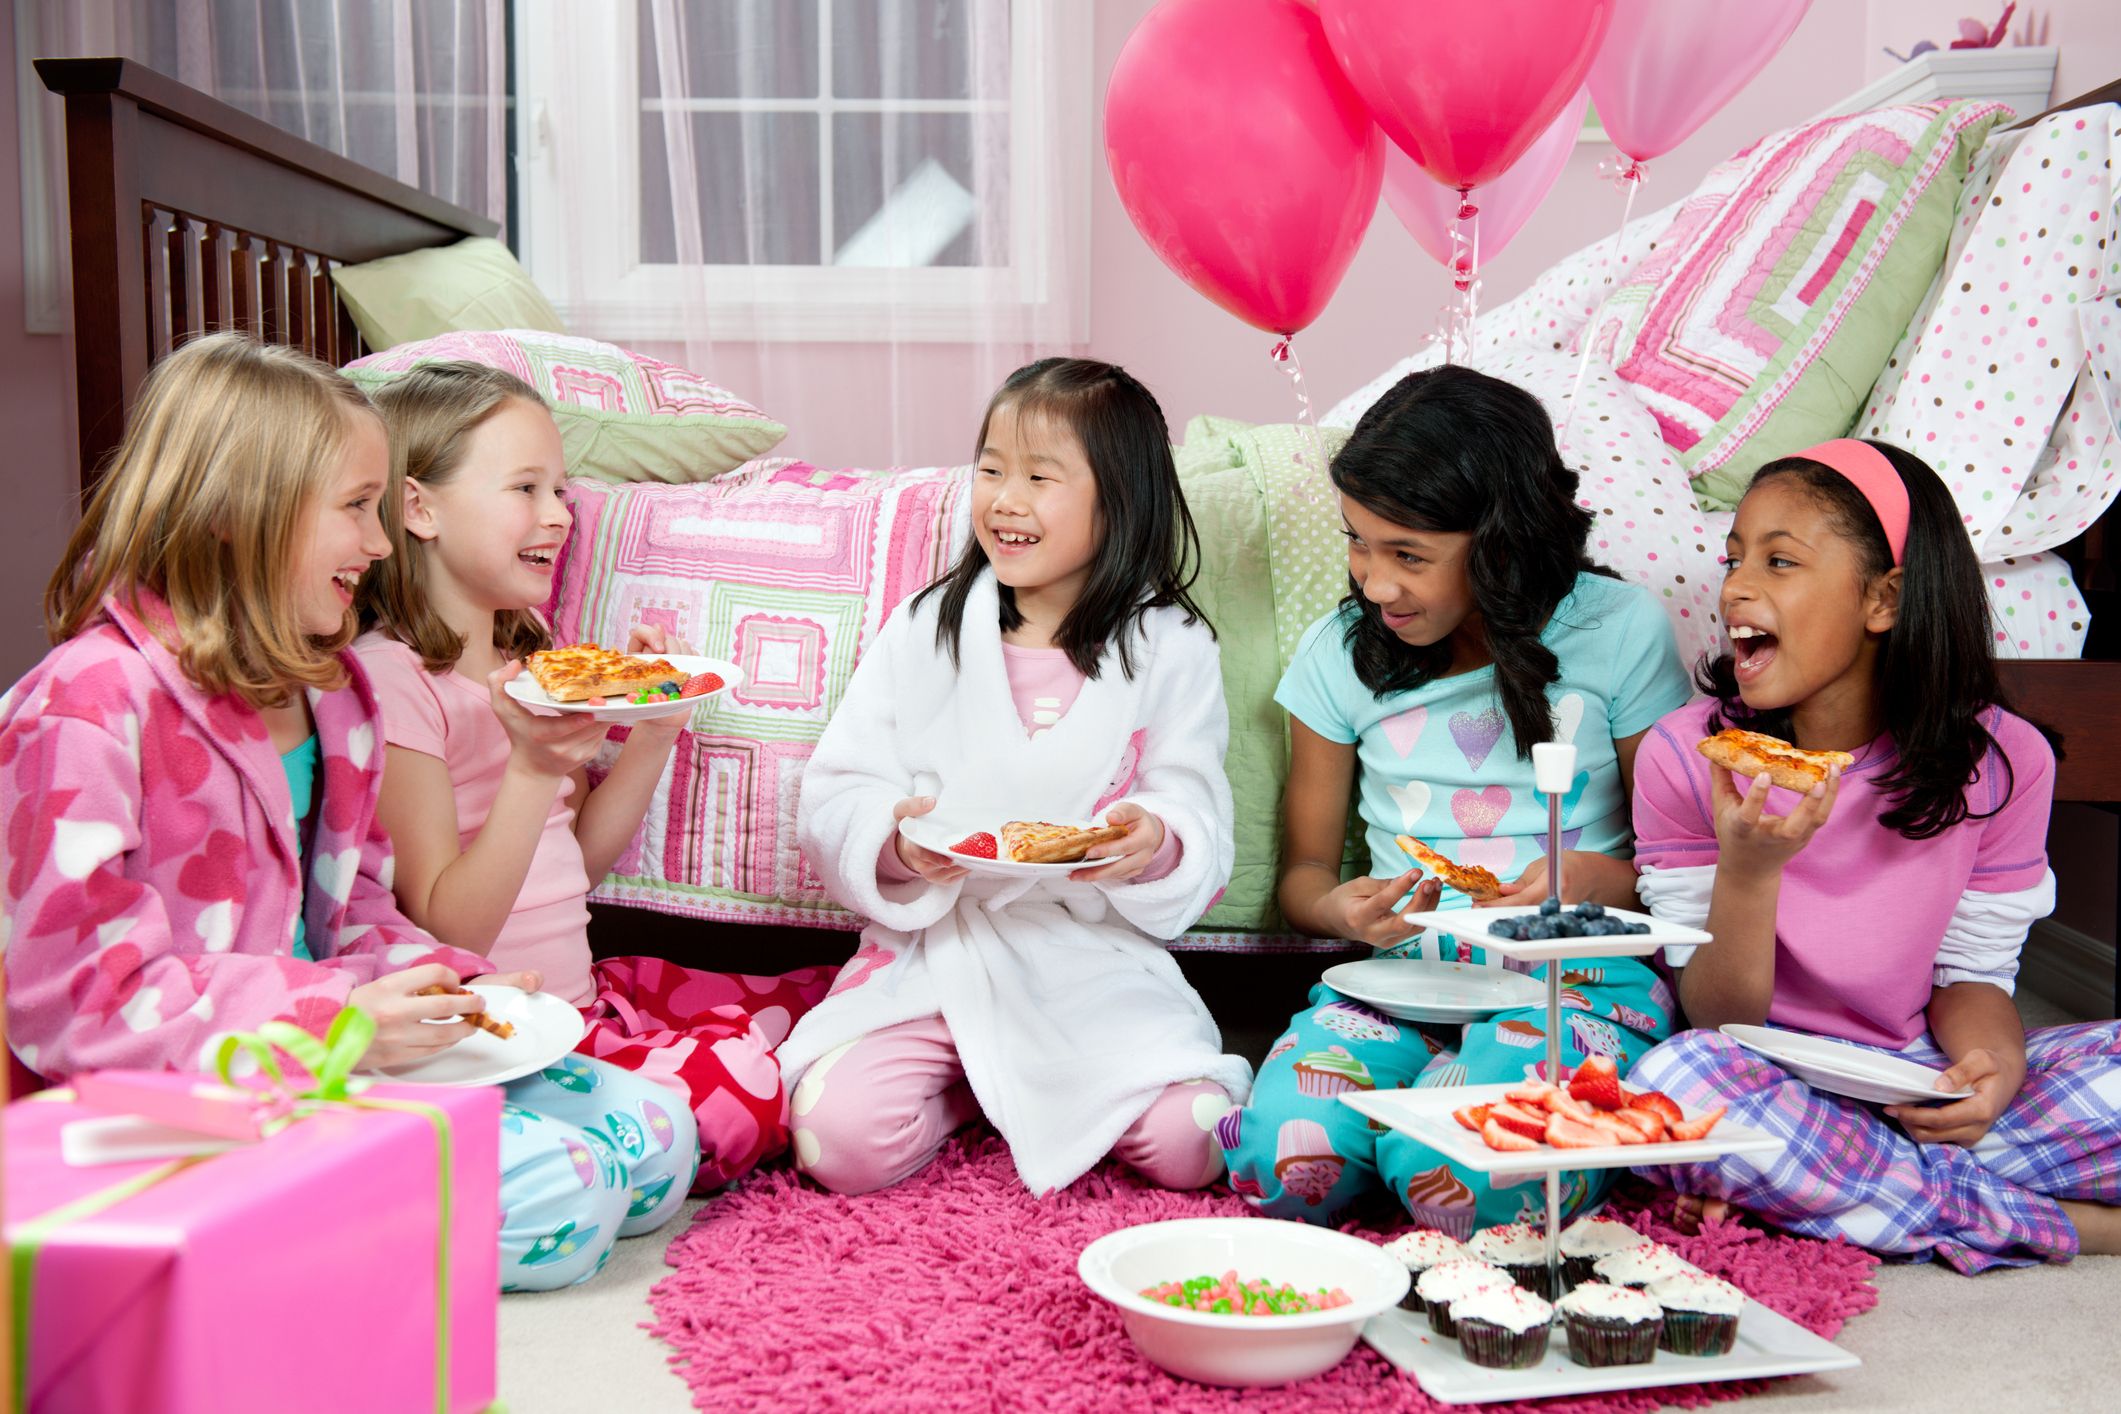 30 Fun Things to Do at a Sleepover - Slumber Party Ideas for Kids, Tweens,  and Teens